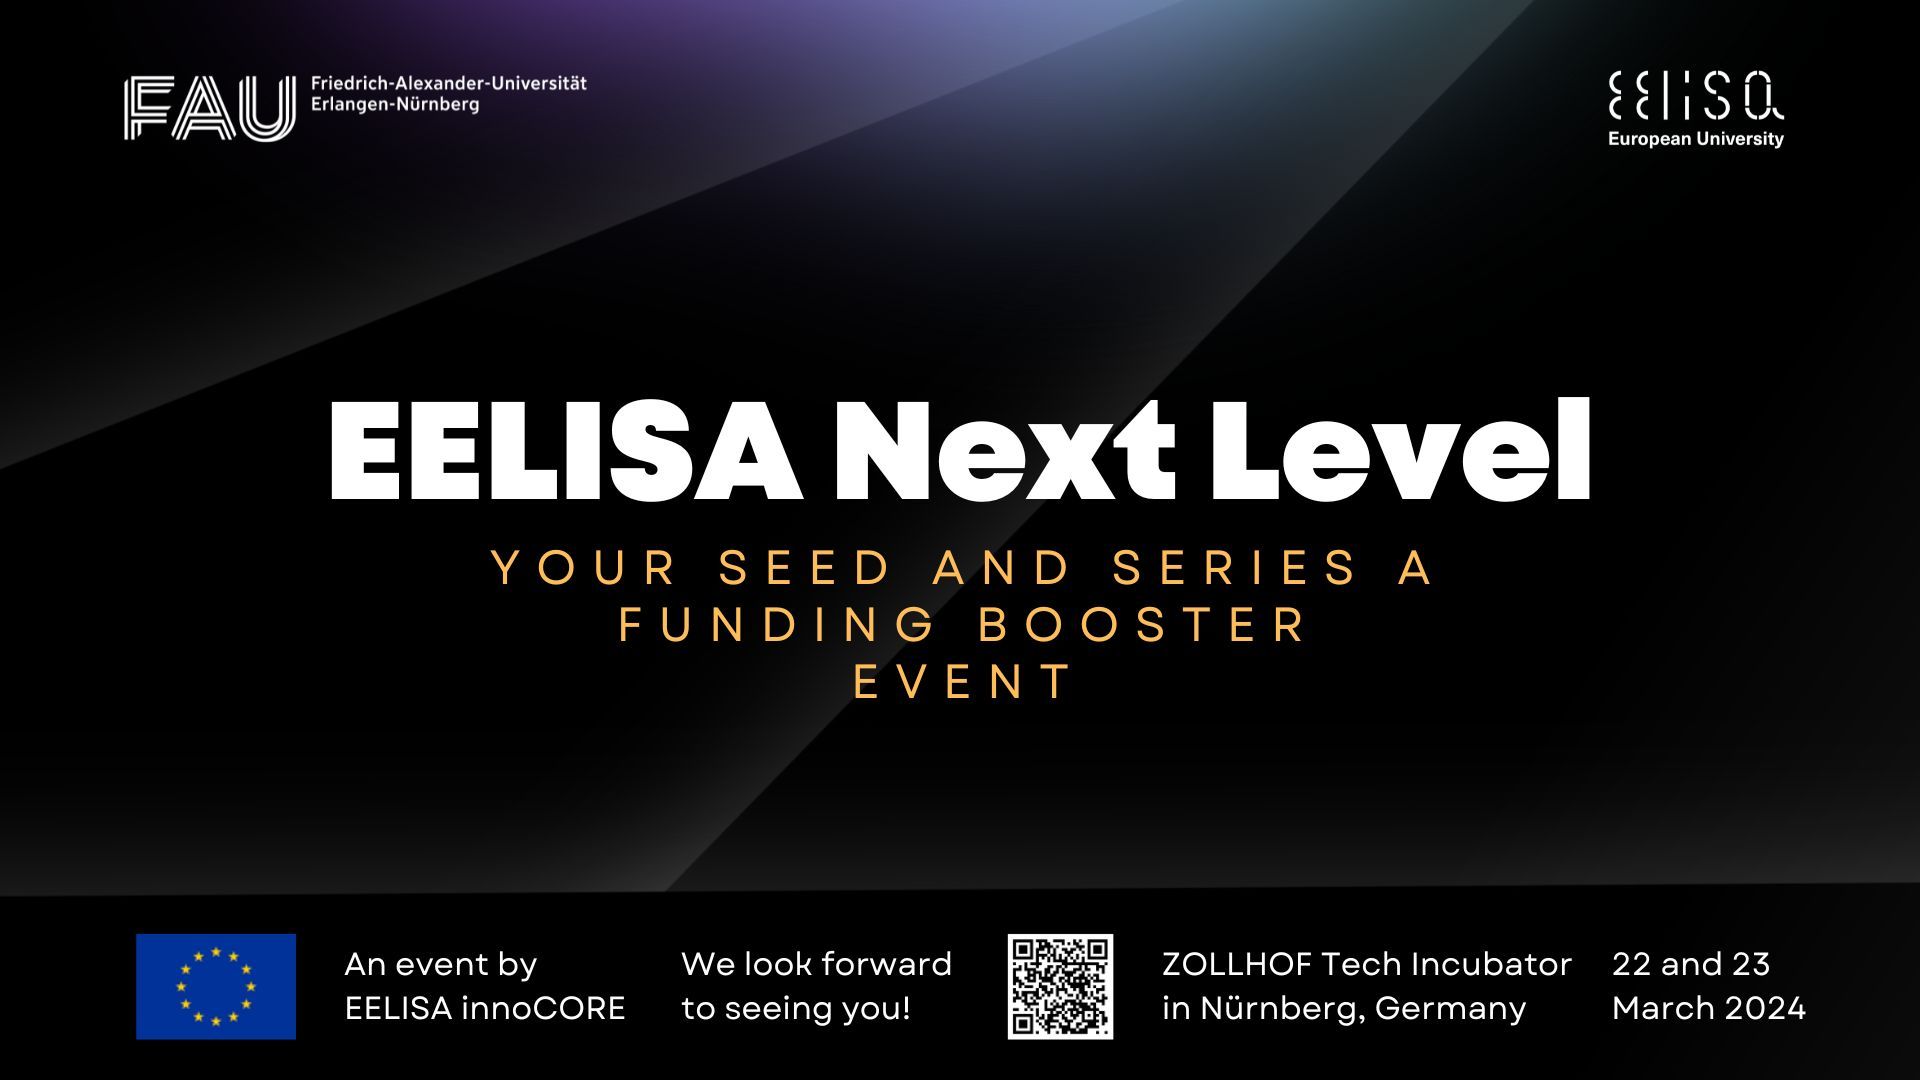 EELISA Next Level: Your Seed and Series A Funding Booster